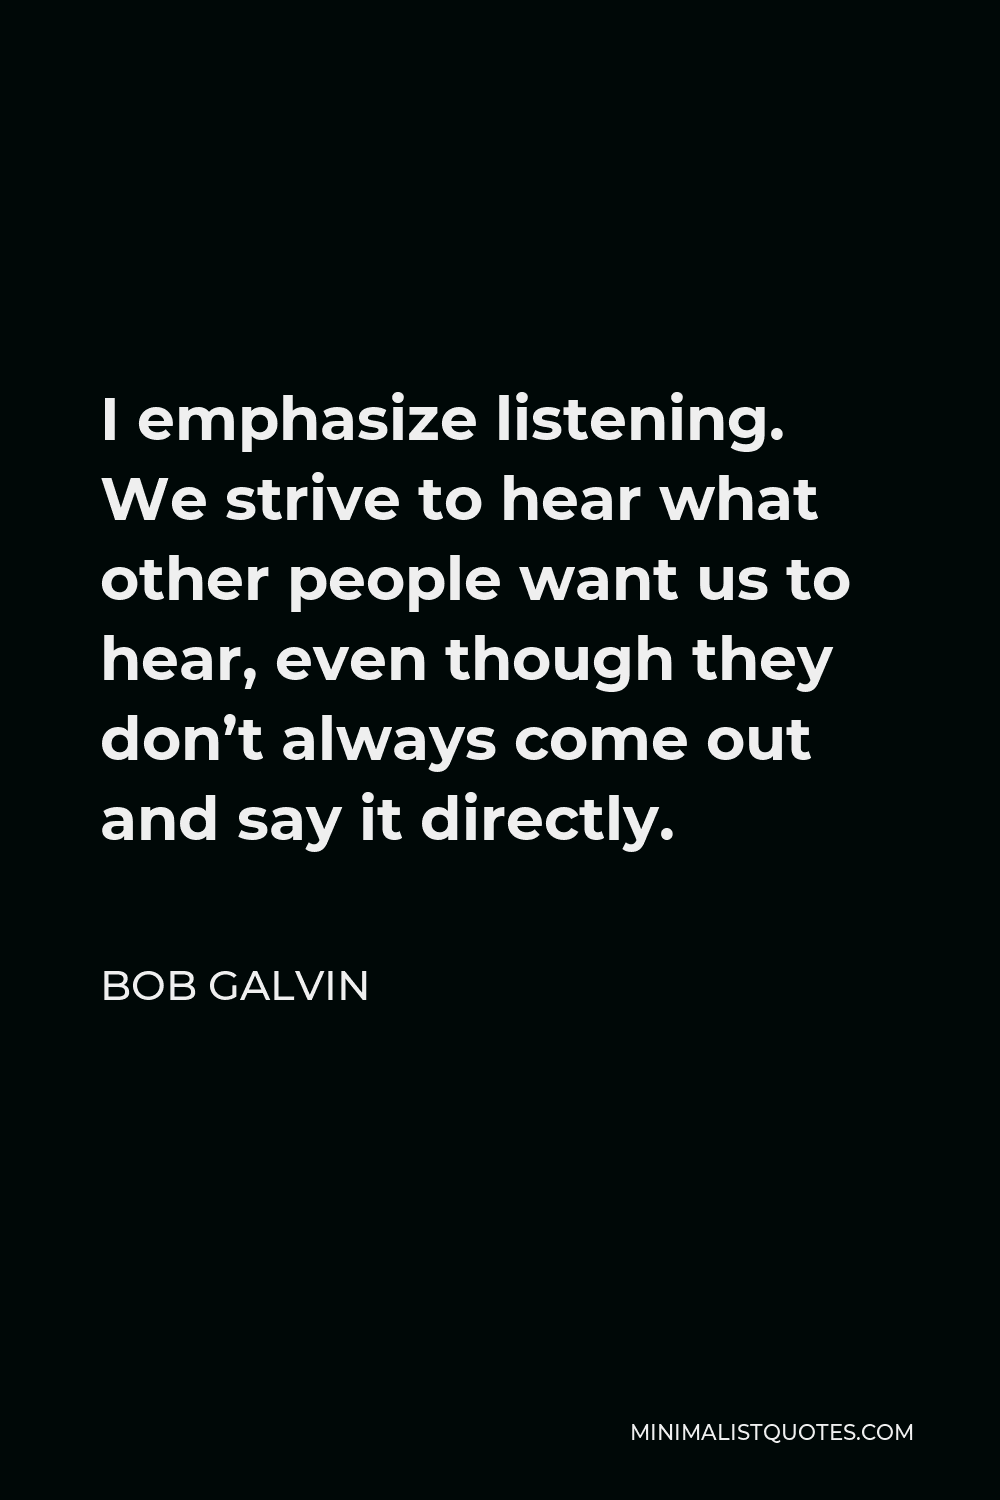 Bob Galvin Quote: I emphasize listening. We strive to hear what other ...